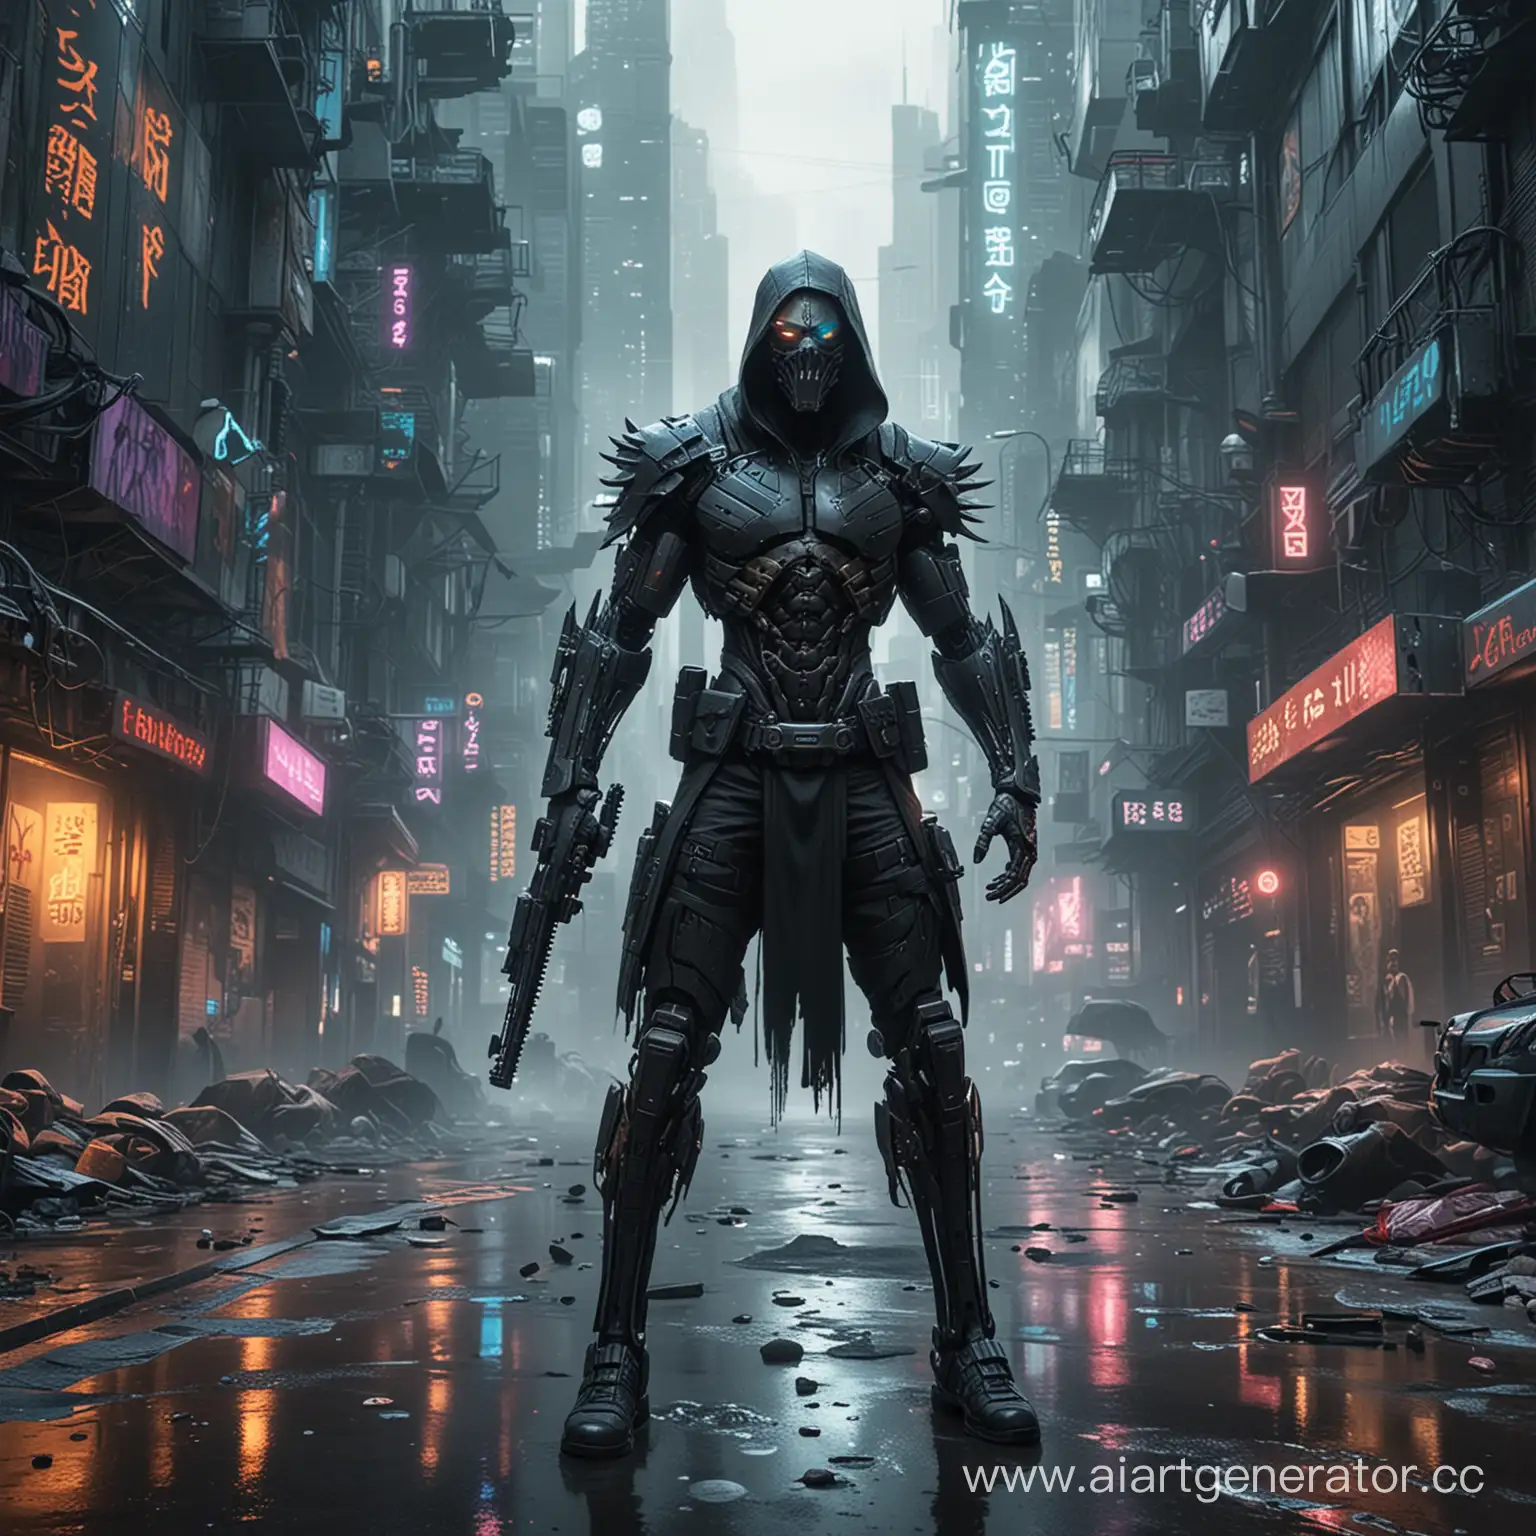 The God of Death wreaks havoc on the streets of cyberpunk city